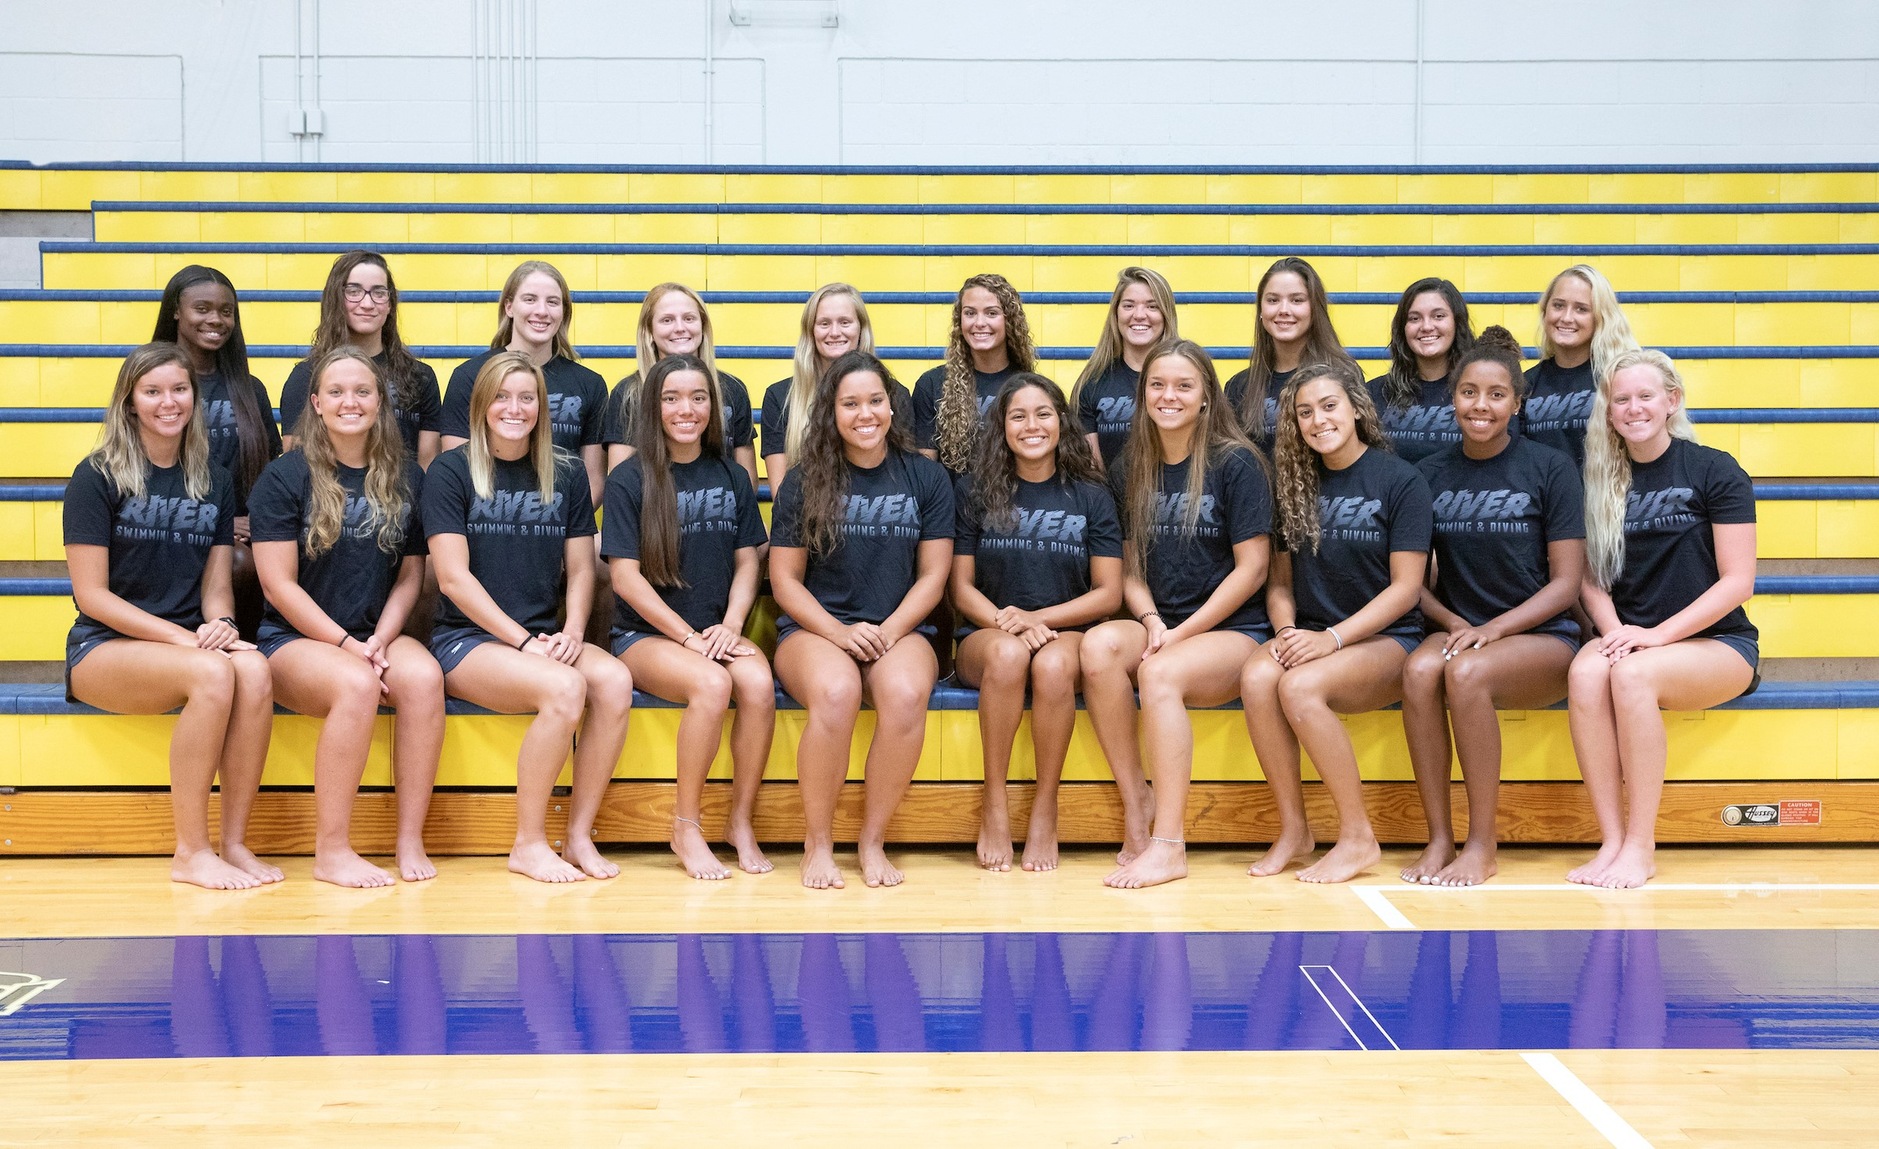 IRSC Women’s Swimming & Diving Team named 2019 NJCAA Academic Team of the Year